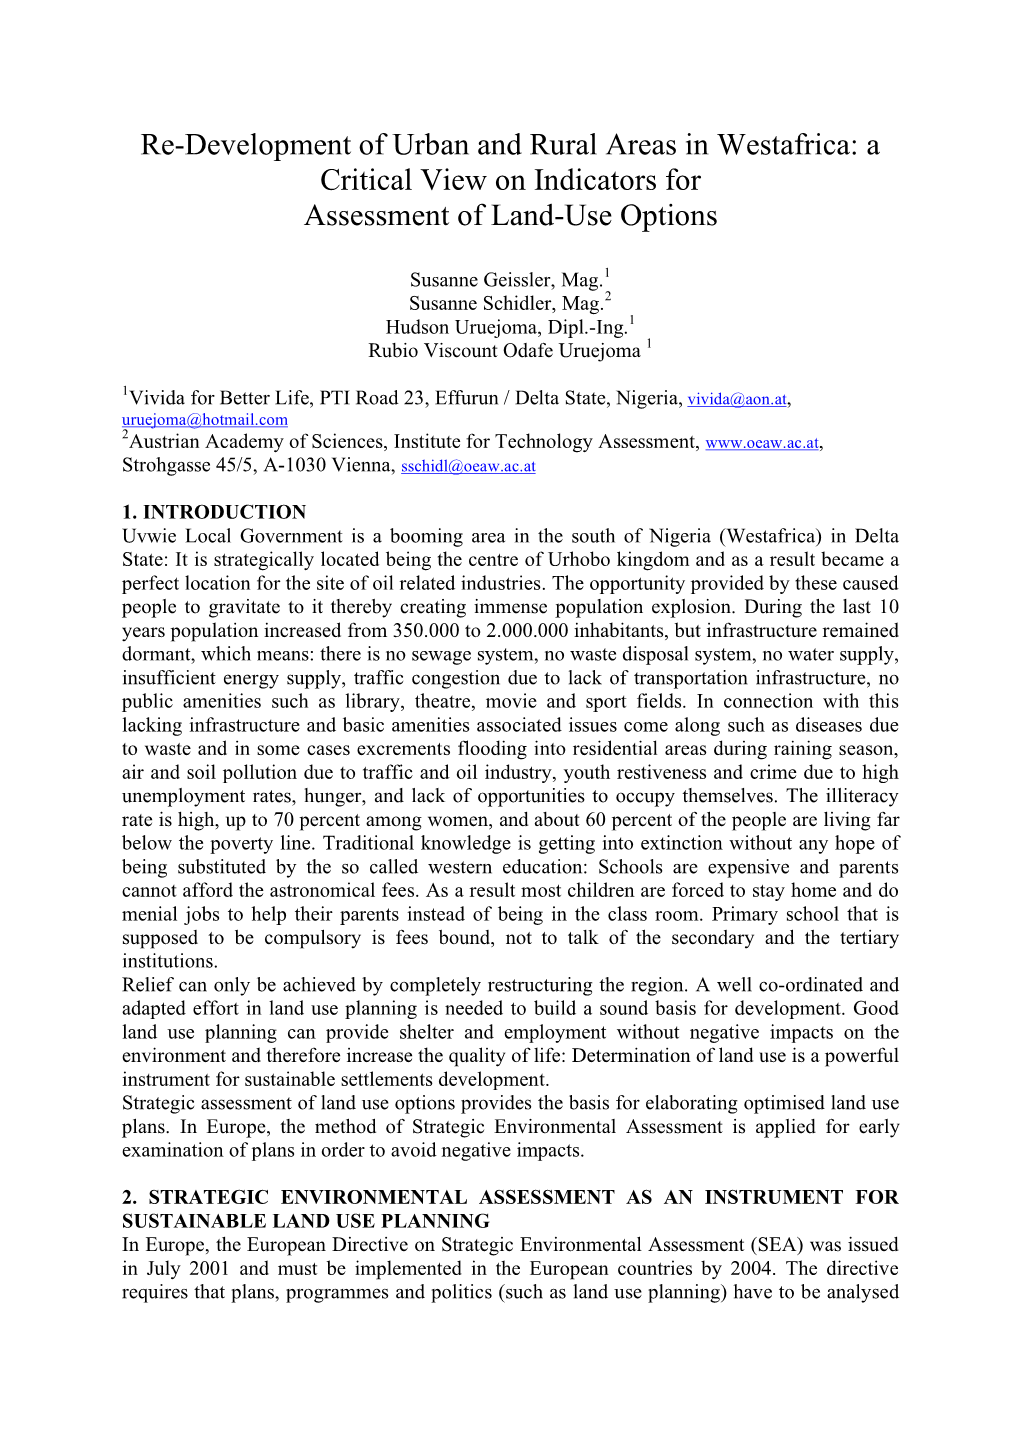 Re-Development of Urban and Rural Areas in Westafrica: a Critical View on Indicators for Assessment of Land-Use Options